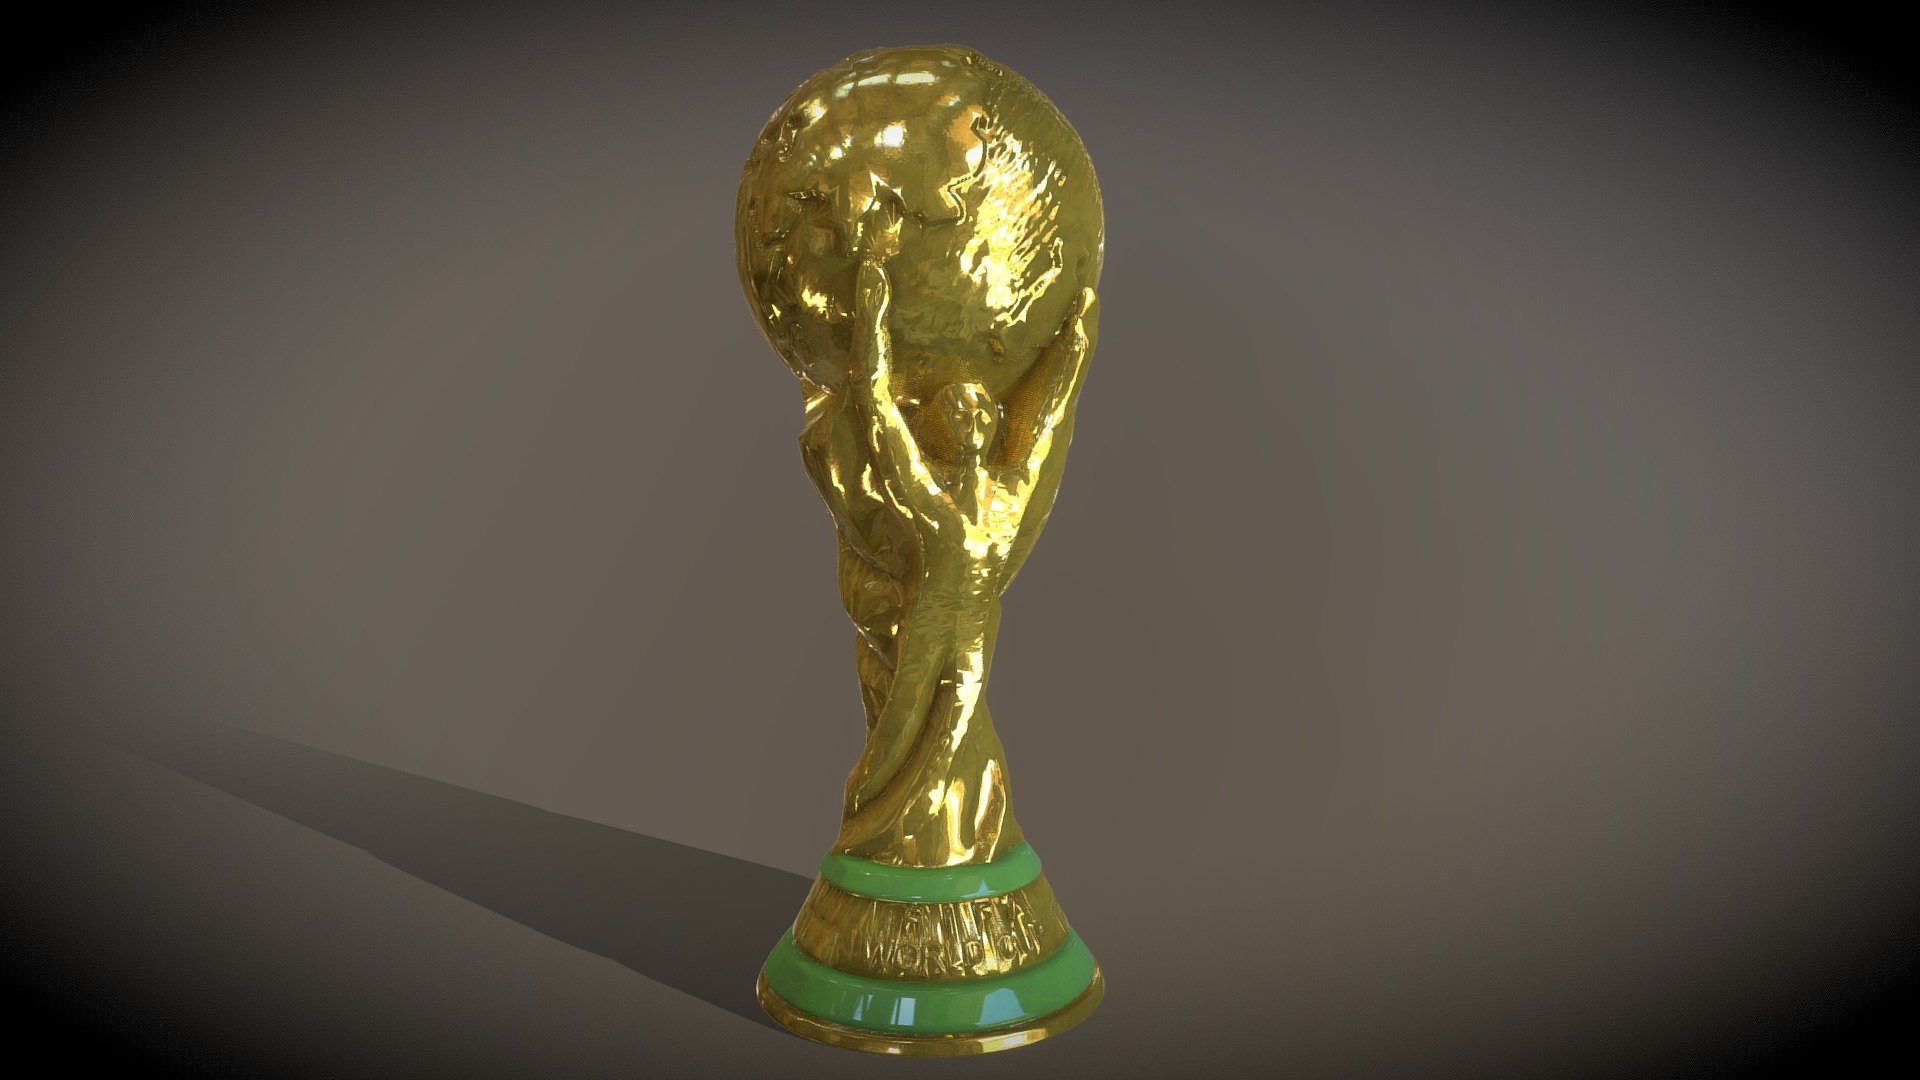 This is a beautiful world cup  trophy. You won’t regret having it, it’s definitely worth the money.

If you got any problem . Please feel free to contact me

sgzxzj13@163.com - World Cup Trophy - 3D model by Easy Game Studio (@Jeremy_Zh) 3d model